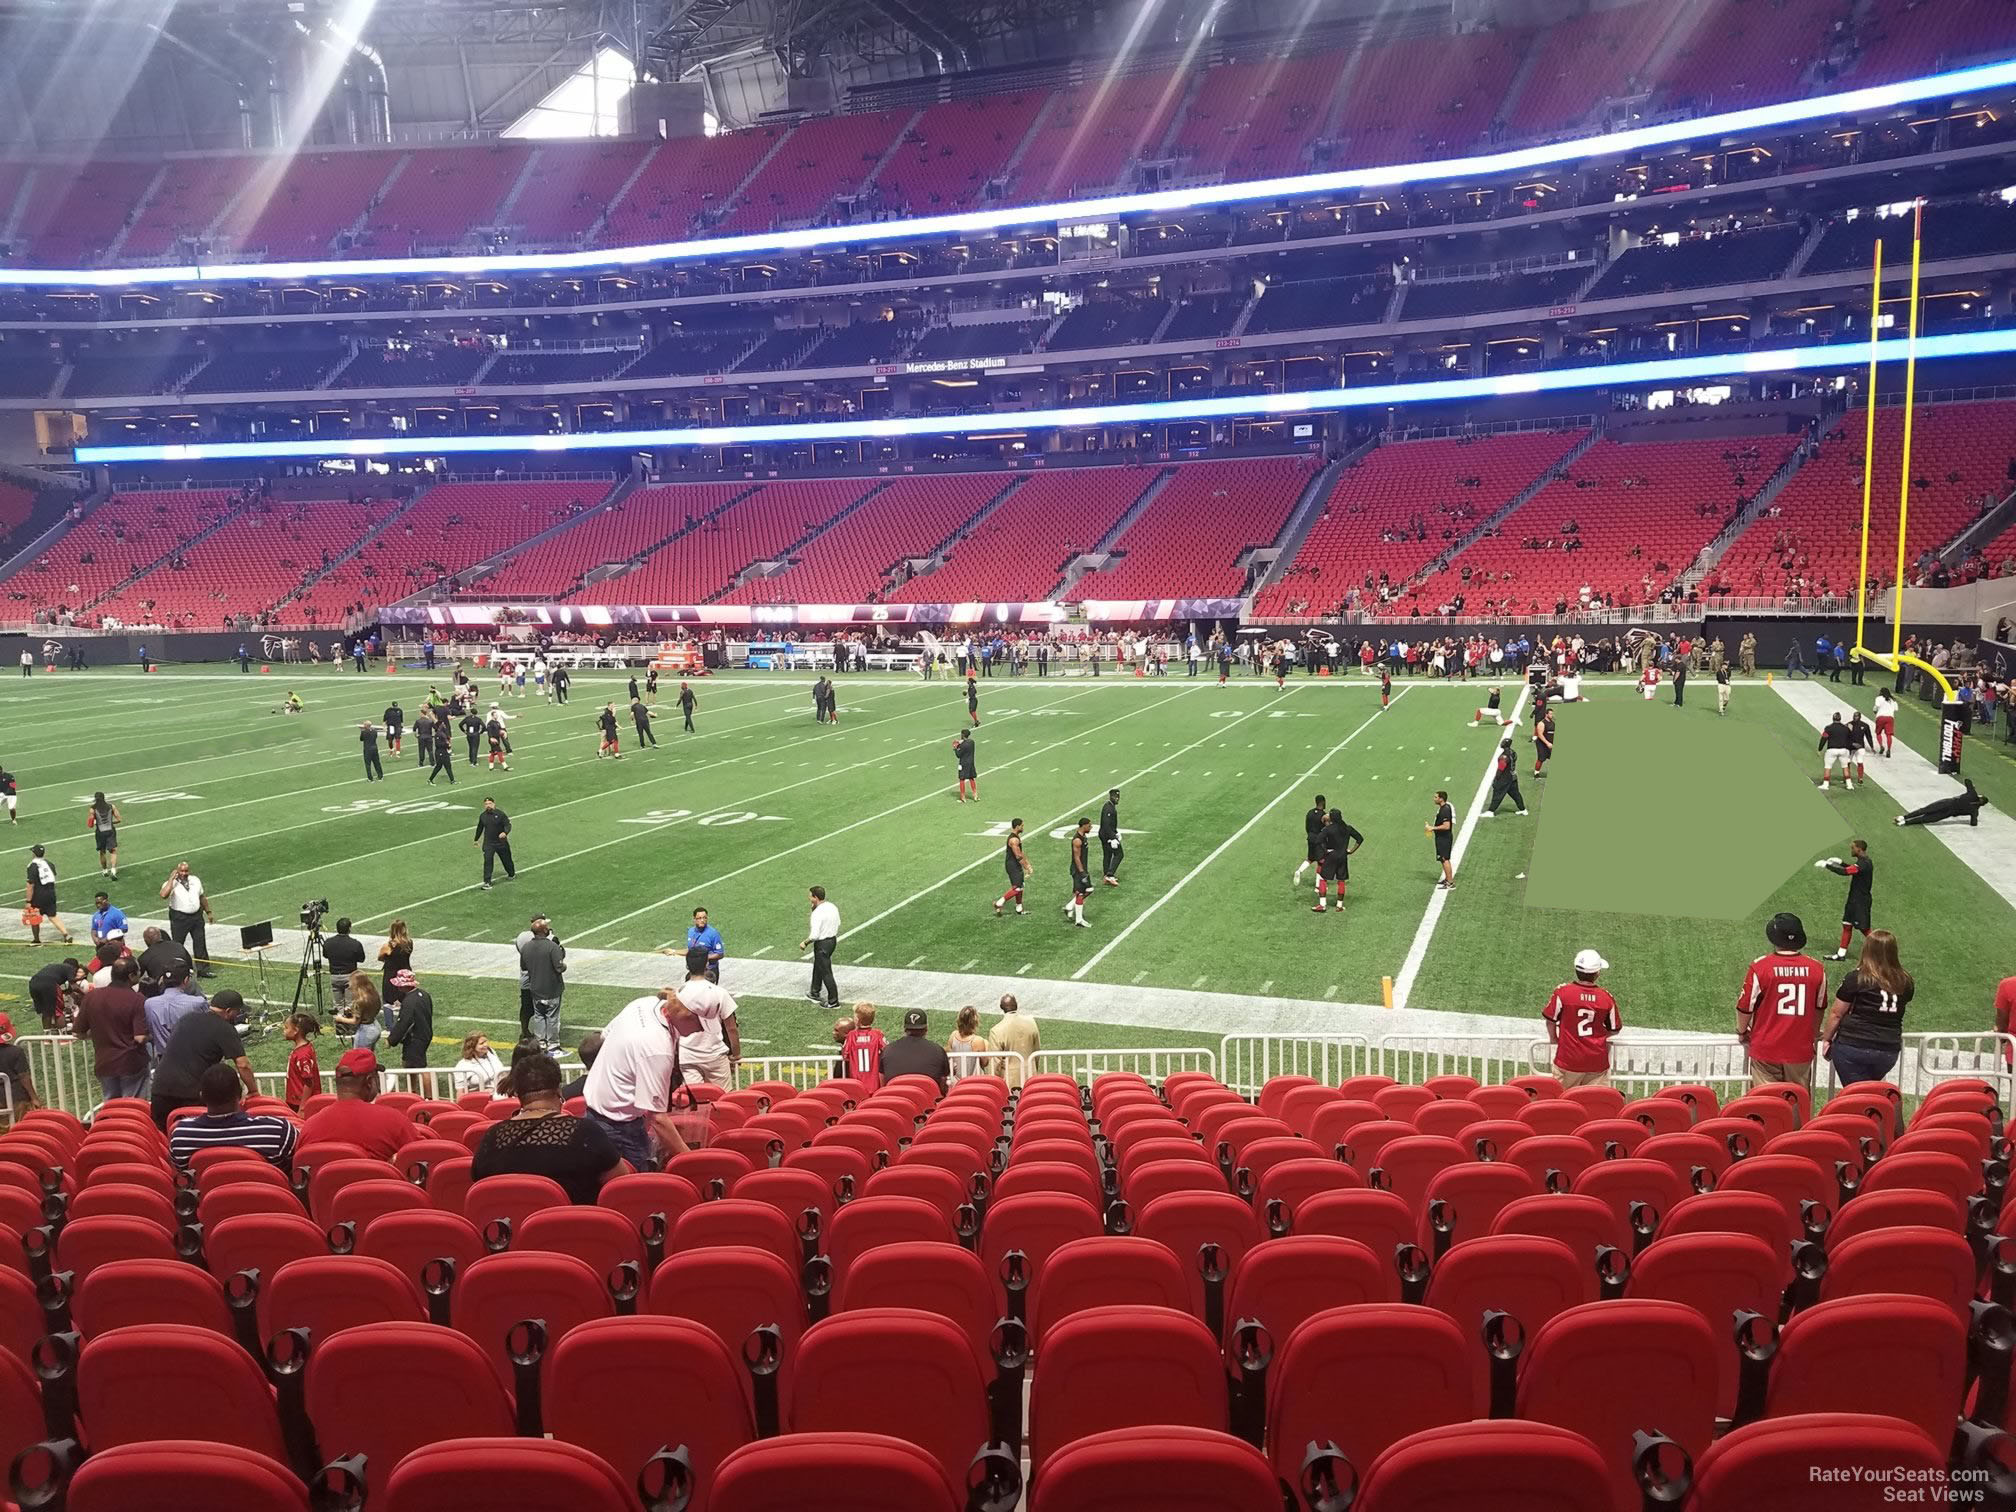 section 124, row 15 seat view  for football - mercedes-benz stadium